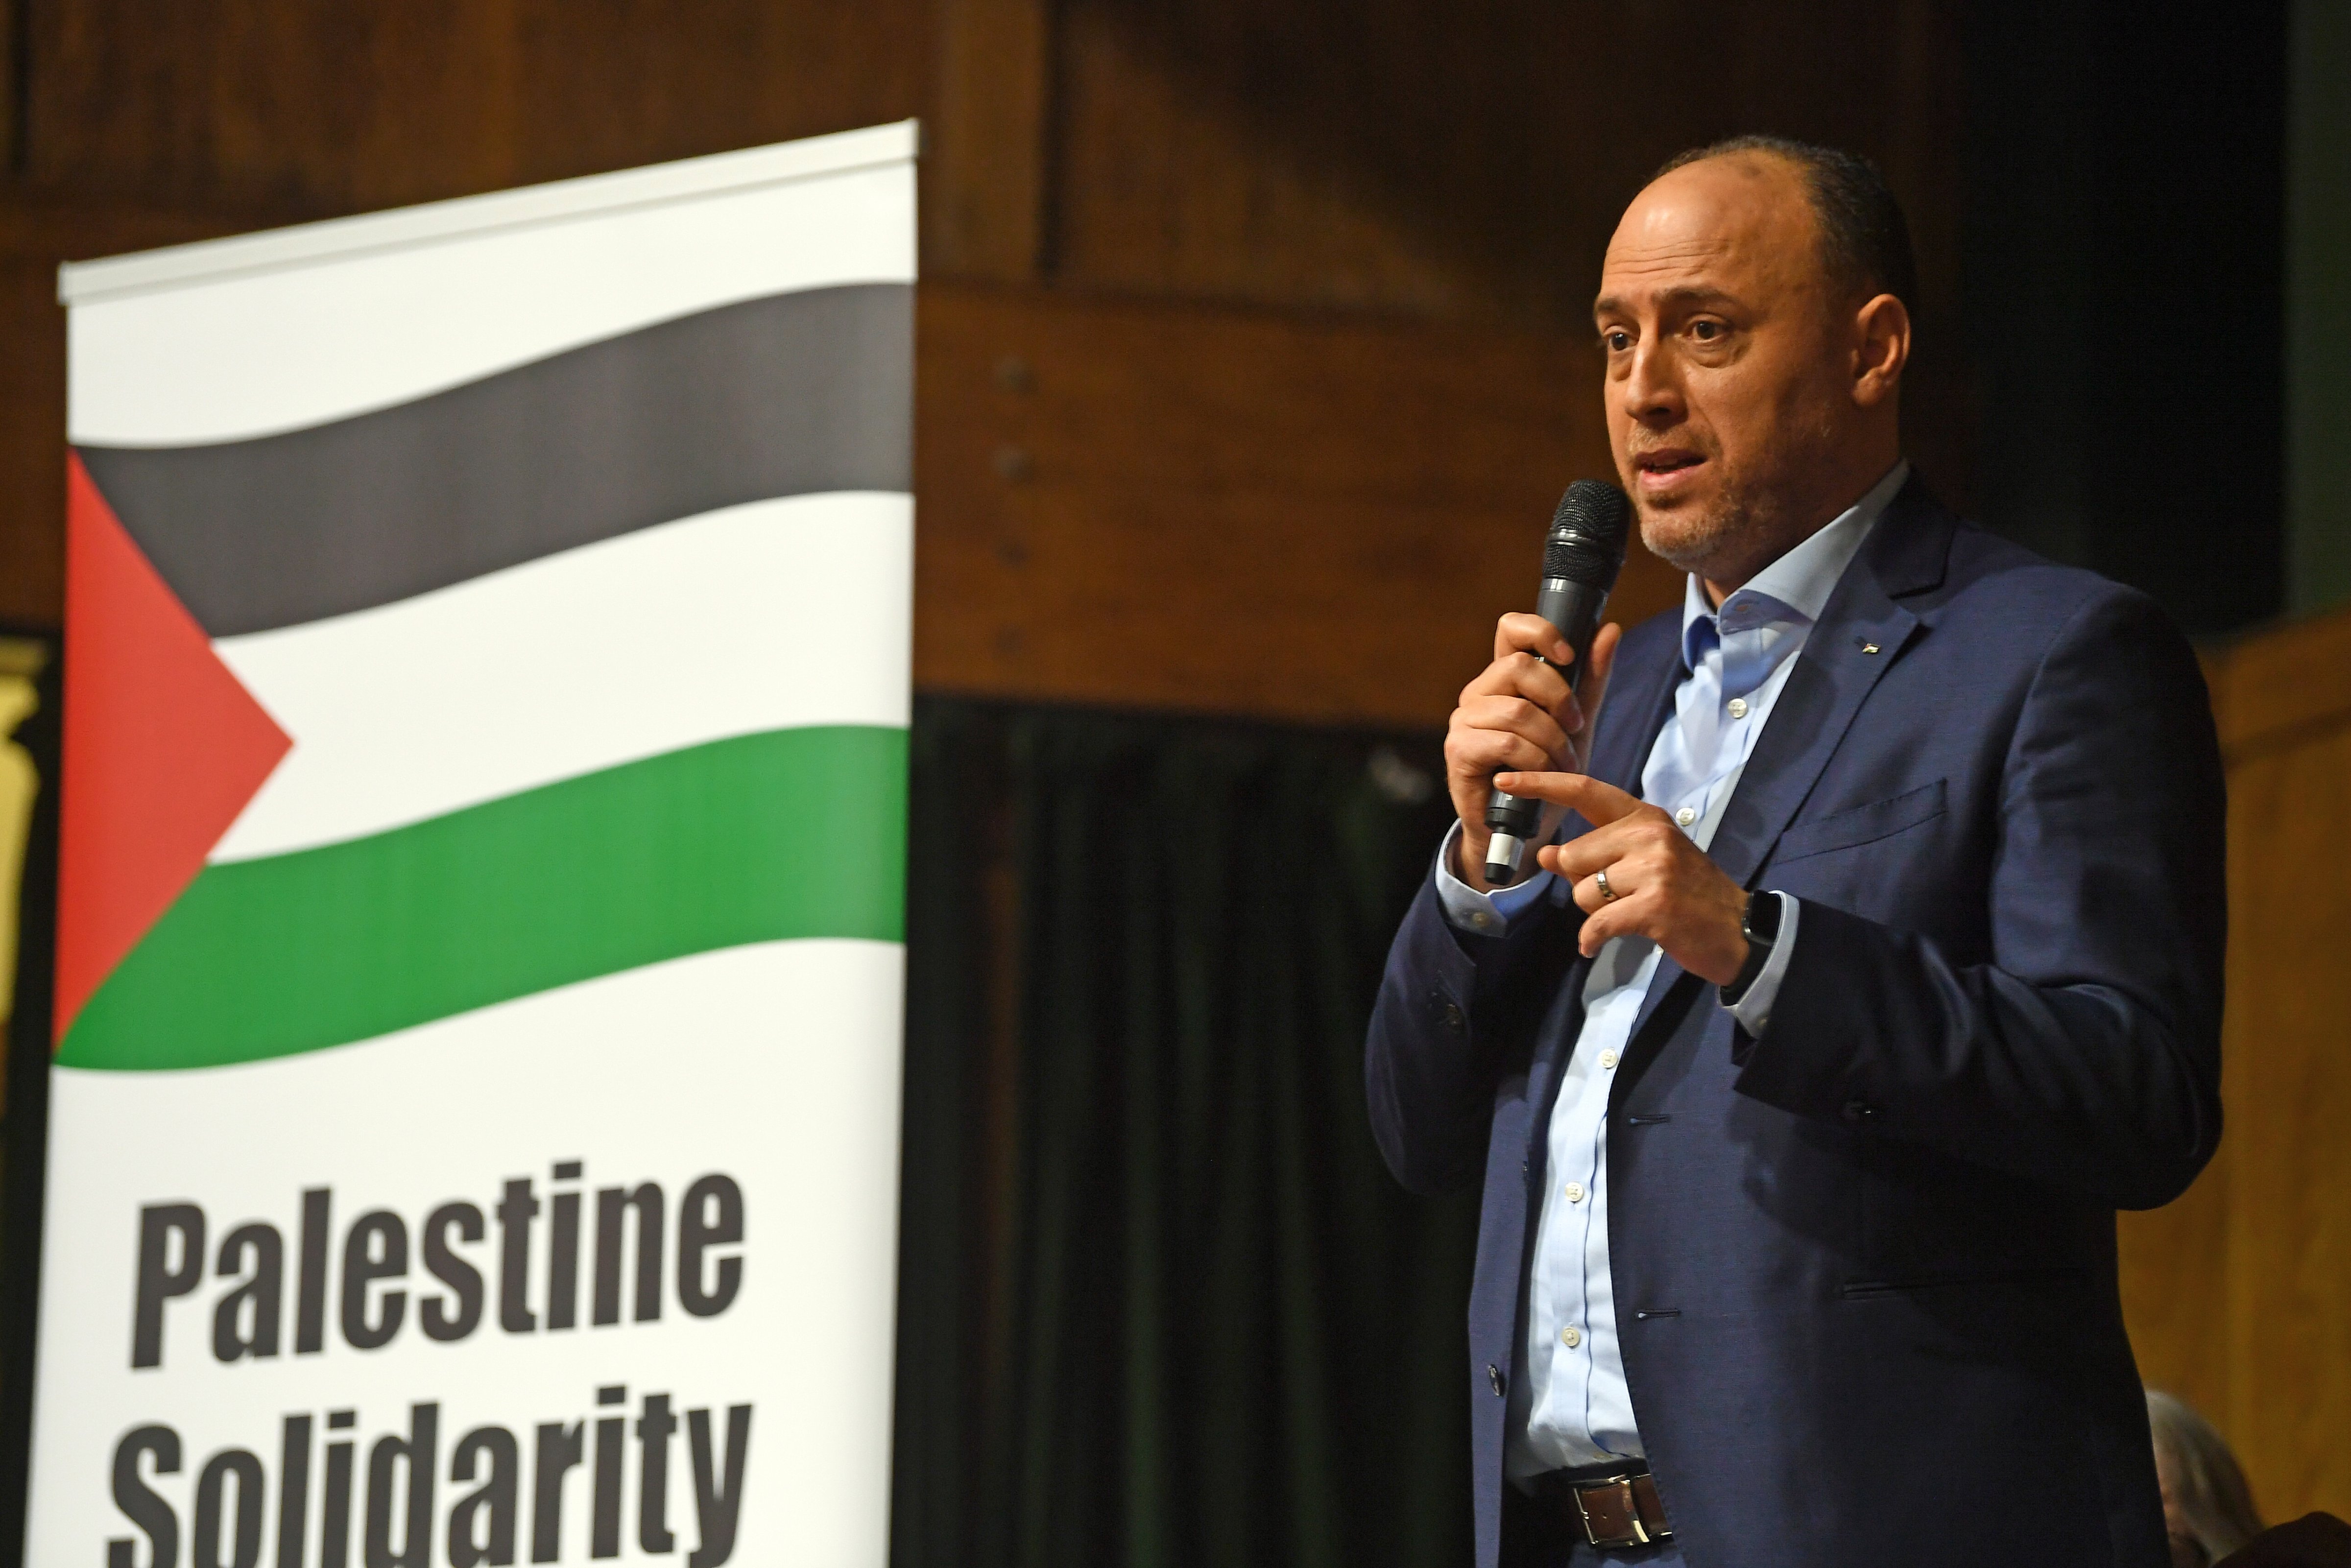 Ambassador Husam Zomlot, Head of Palestinian Mission to the UK, speaking at Exist, Resist, Return: No to Trump's deal! organized by the Palestine Solidarity Campaign, at Conway Hall in London. (Victoria Jones—PA Images/Getty Images)